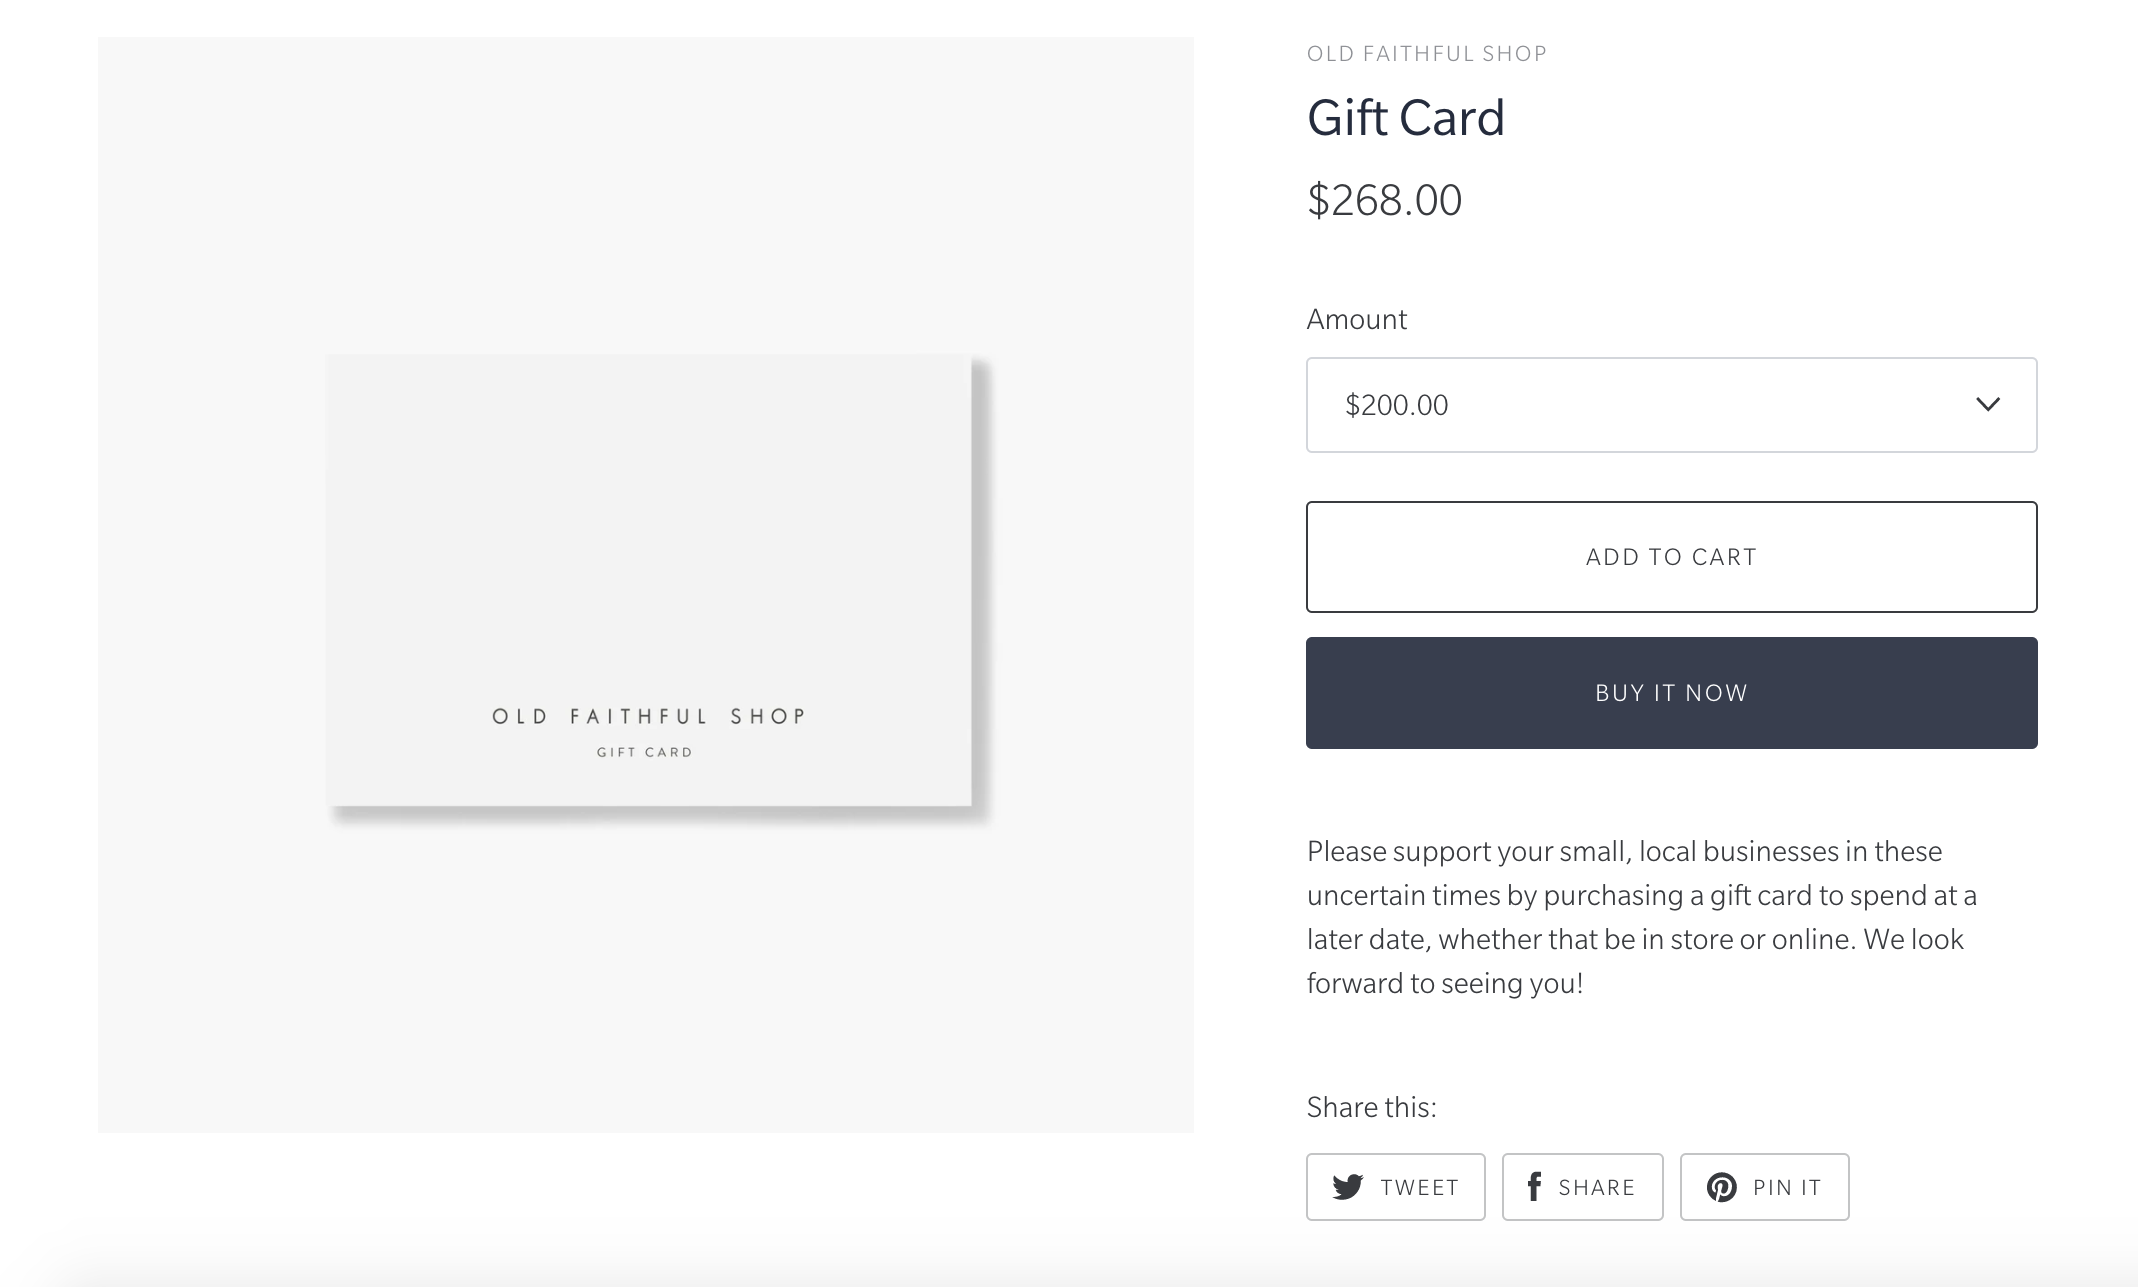 featured_product_is_showing_gift_card_product.png